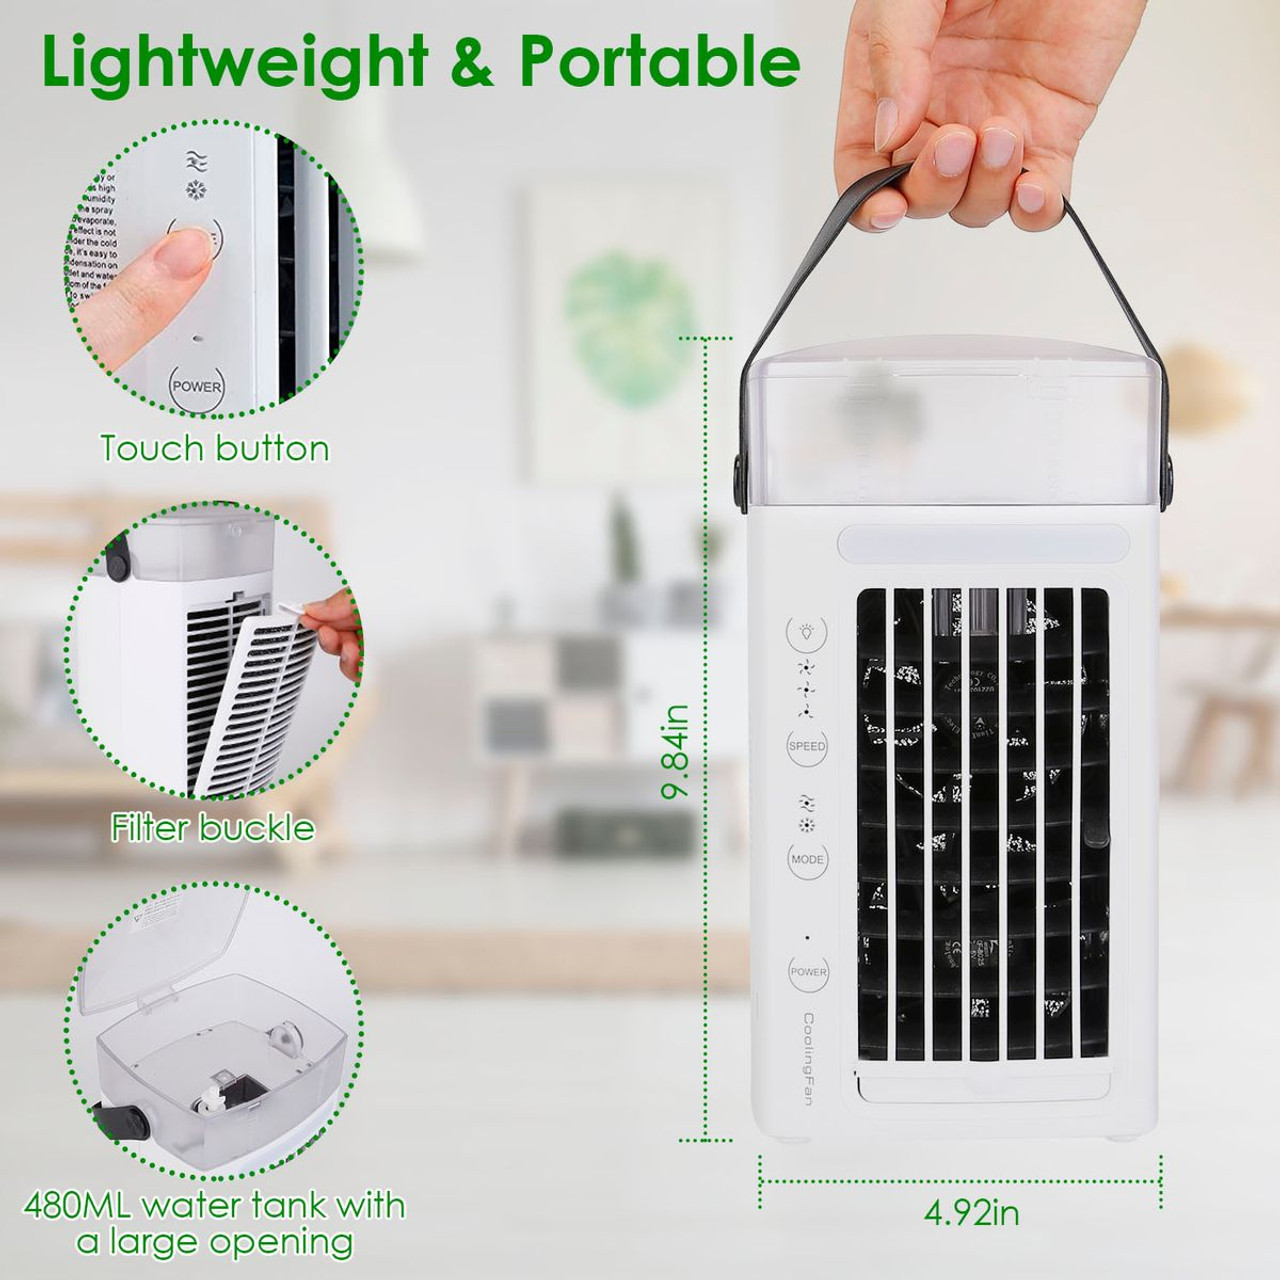 4-in-1 Portable Air Conditioner Fan by iMounTEK® product image